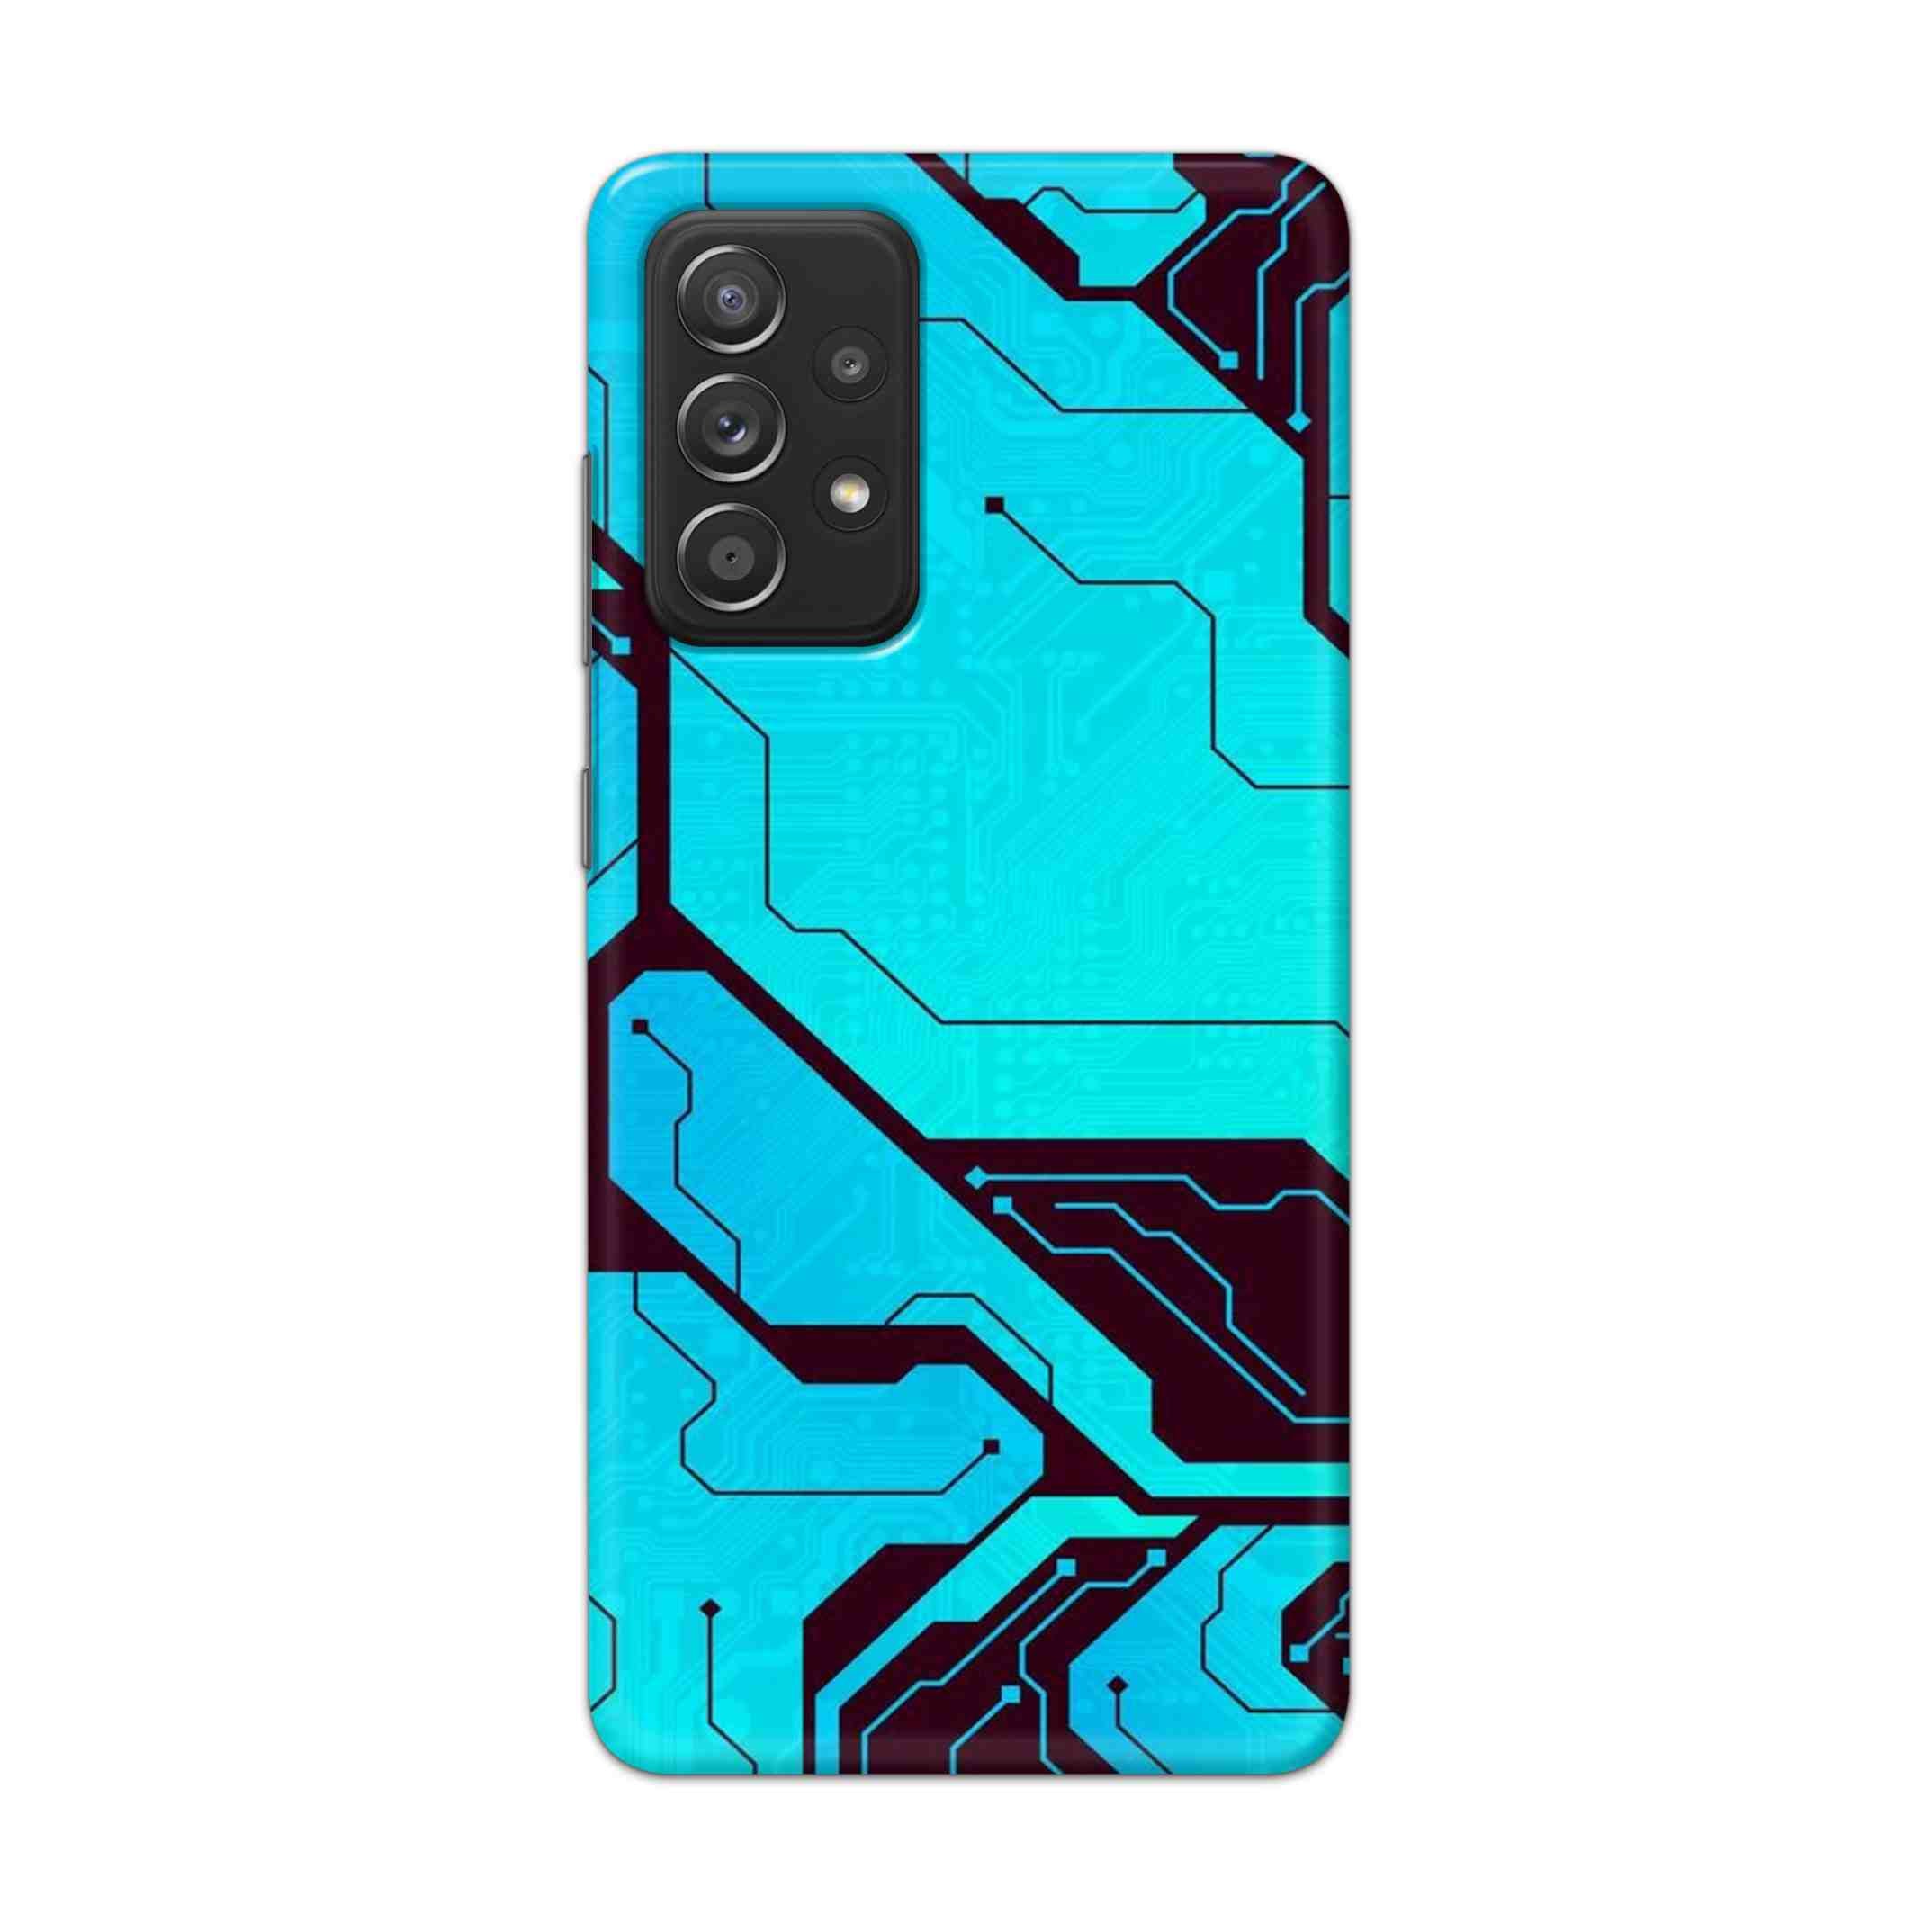 Buy Futuristic Line Hard Back Mobile Phone Case Cover For Samsung Galaxy A52 Online